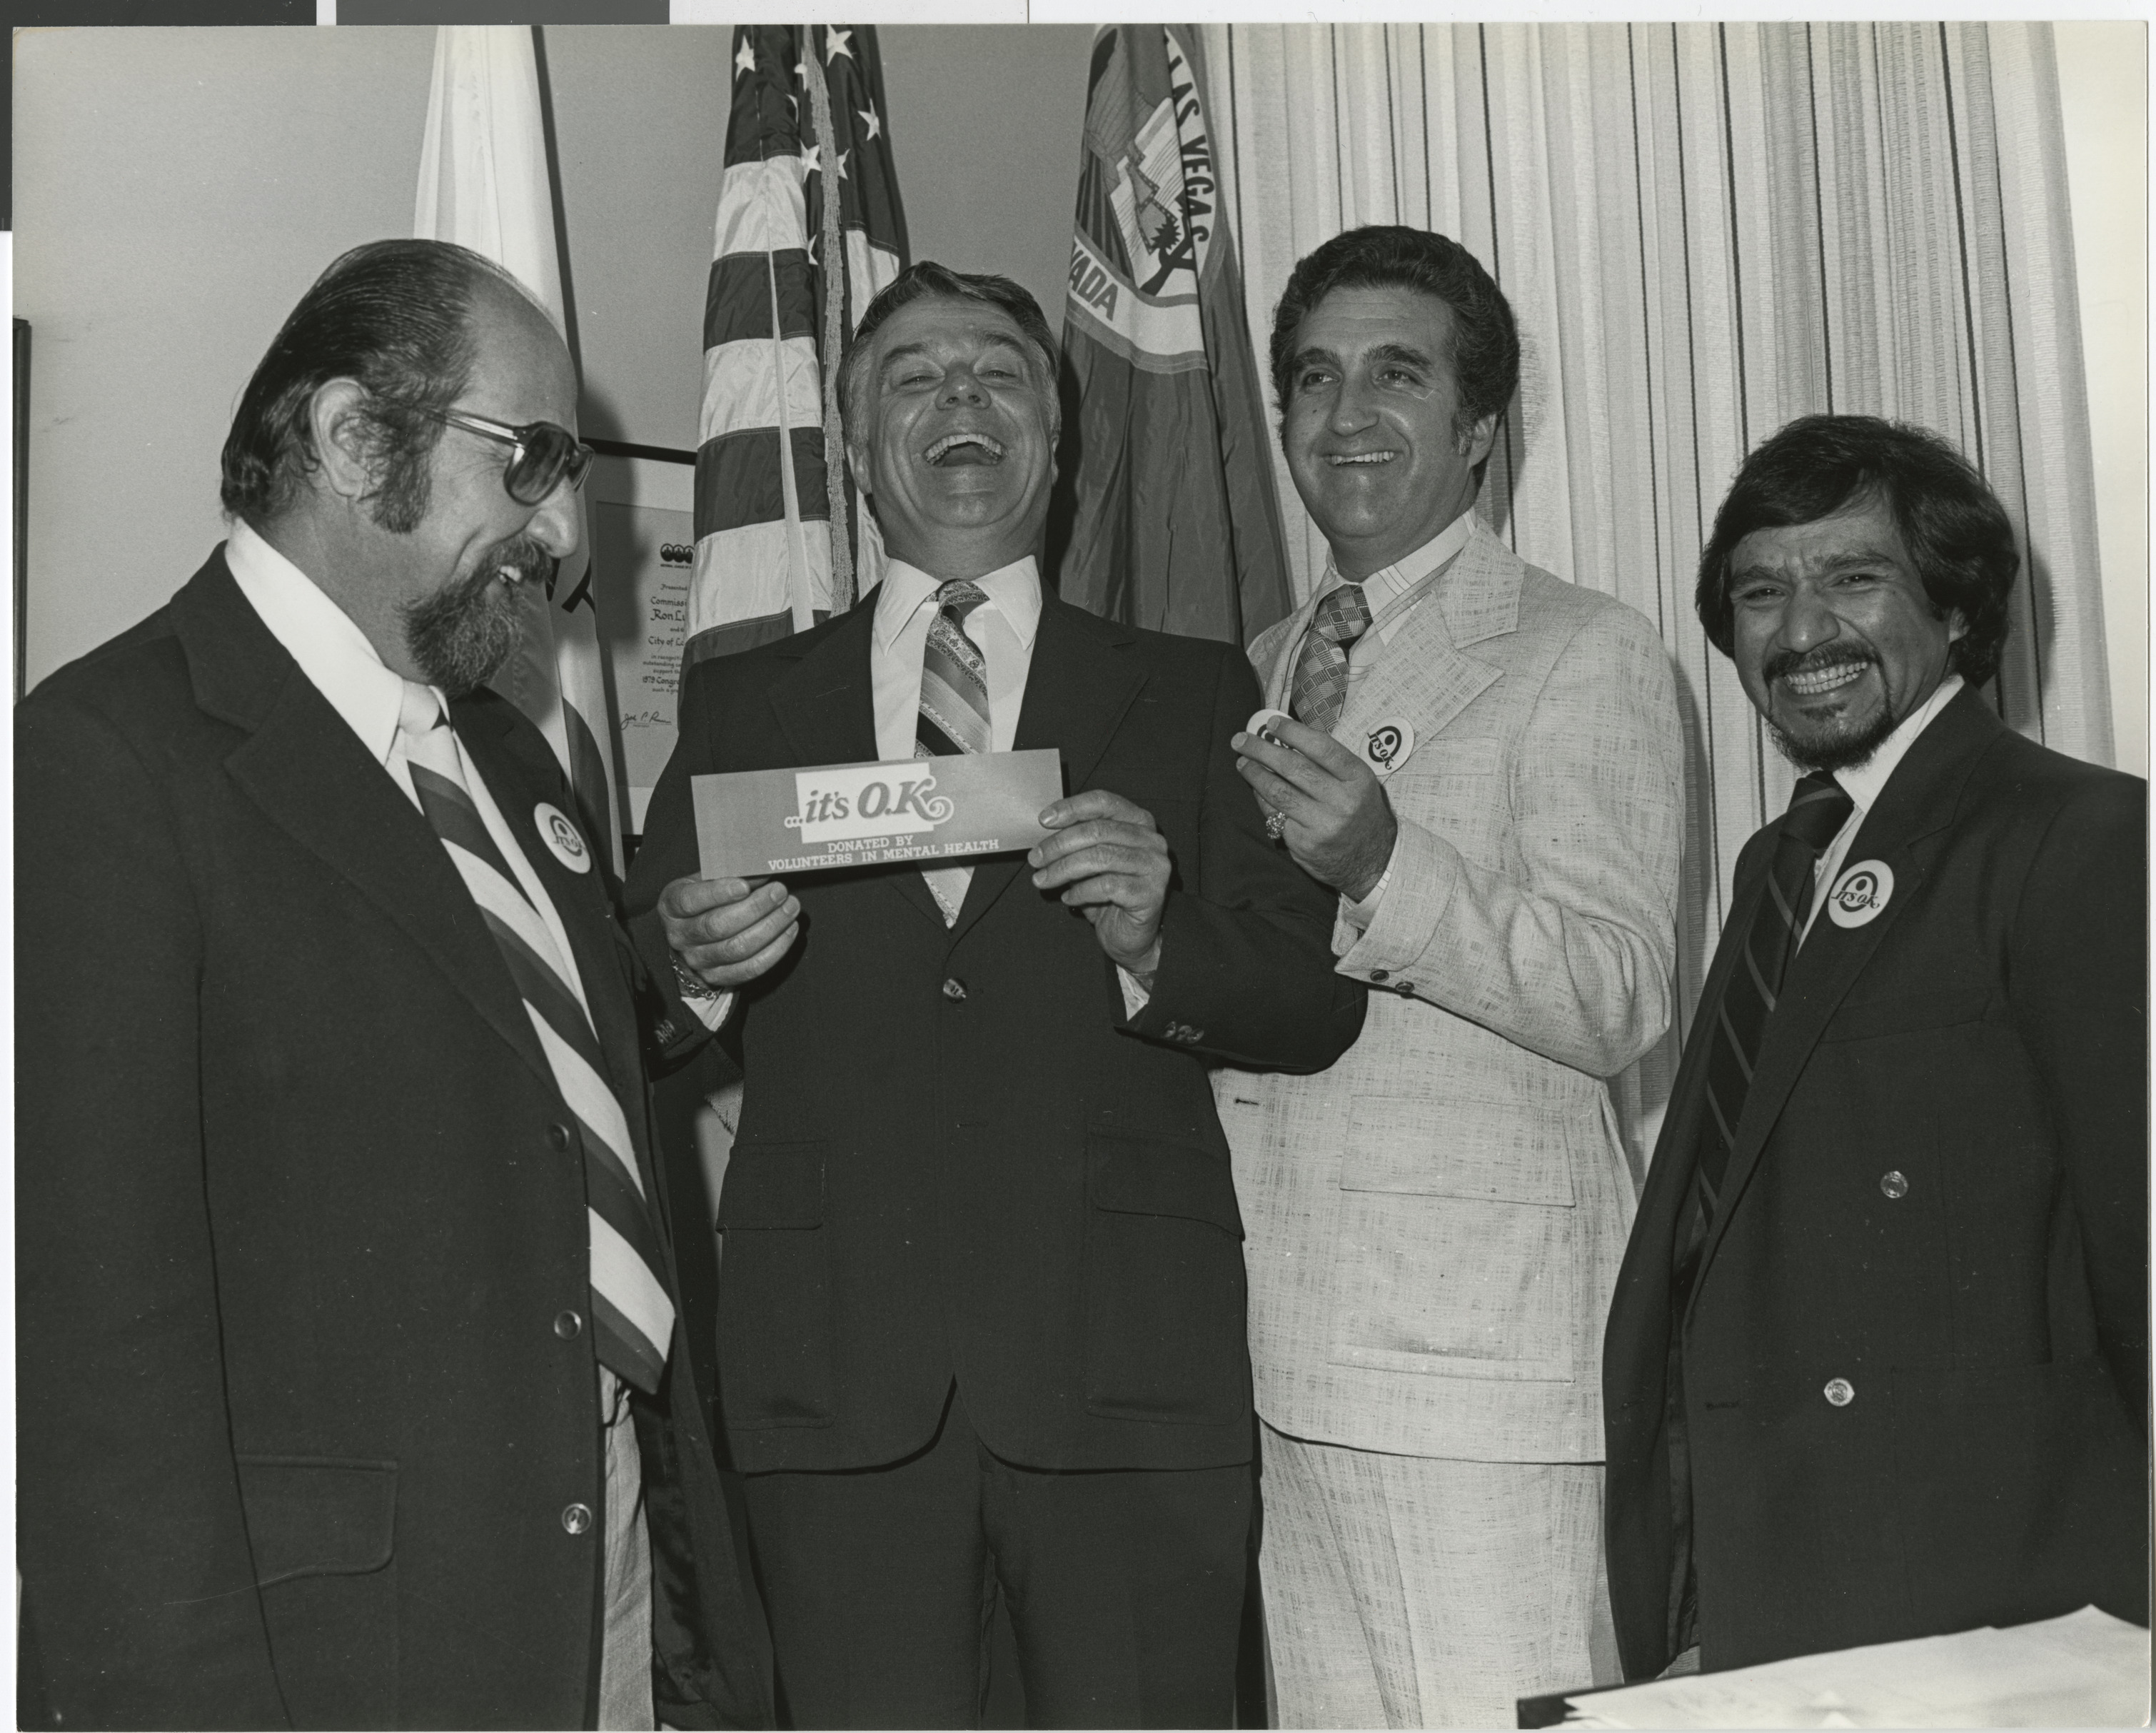 Photograph of Ron Lurie (second from right) with a group of men, including Mayor Briare holding a sticker that reads "... it's OK Donated by Voluteers in Mental Health"